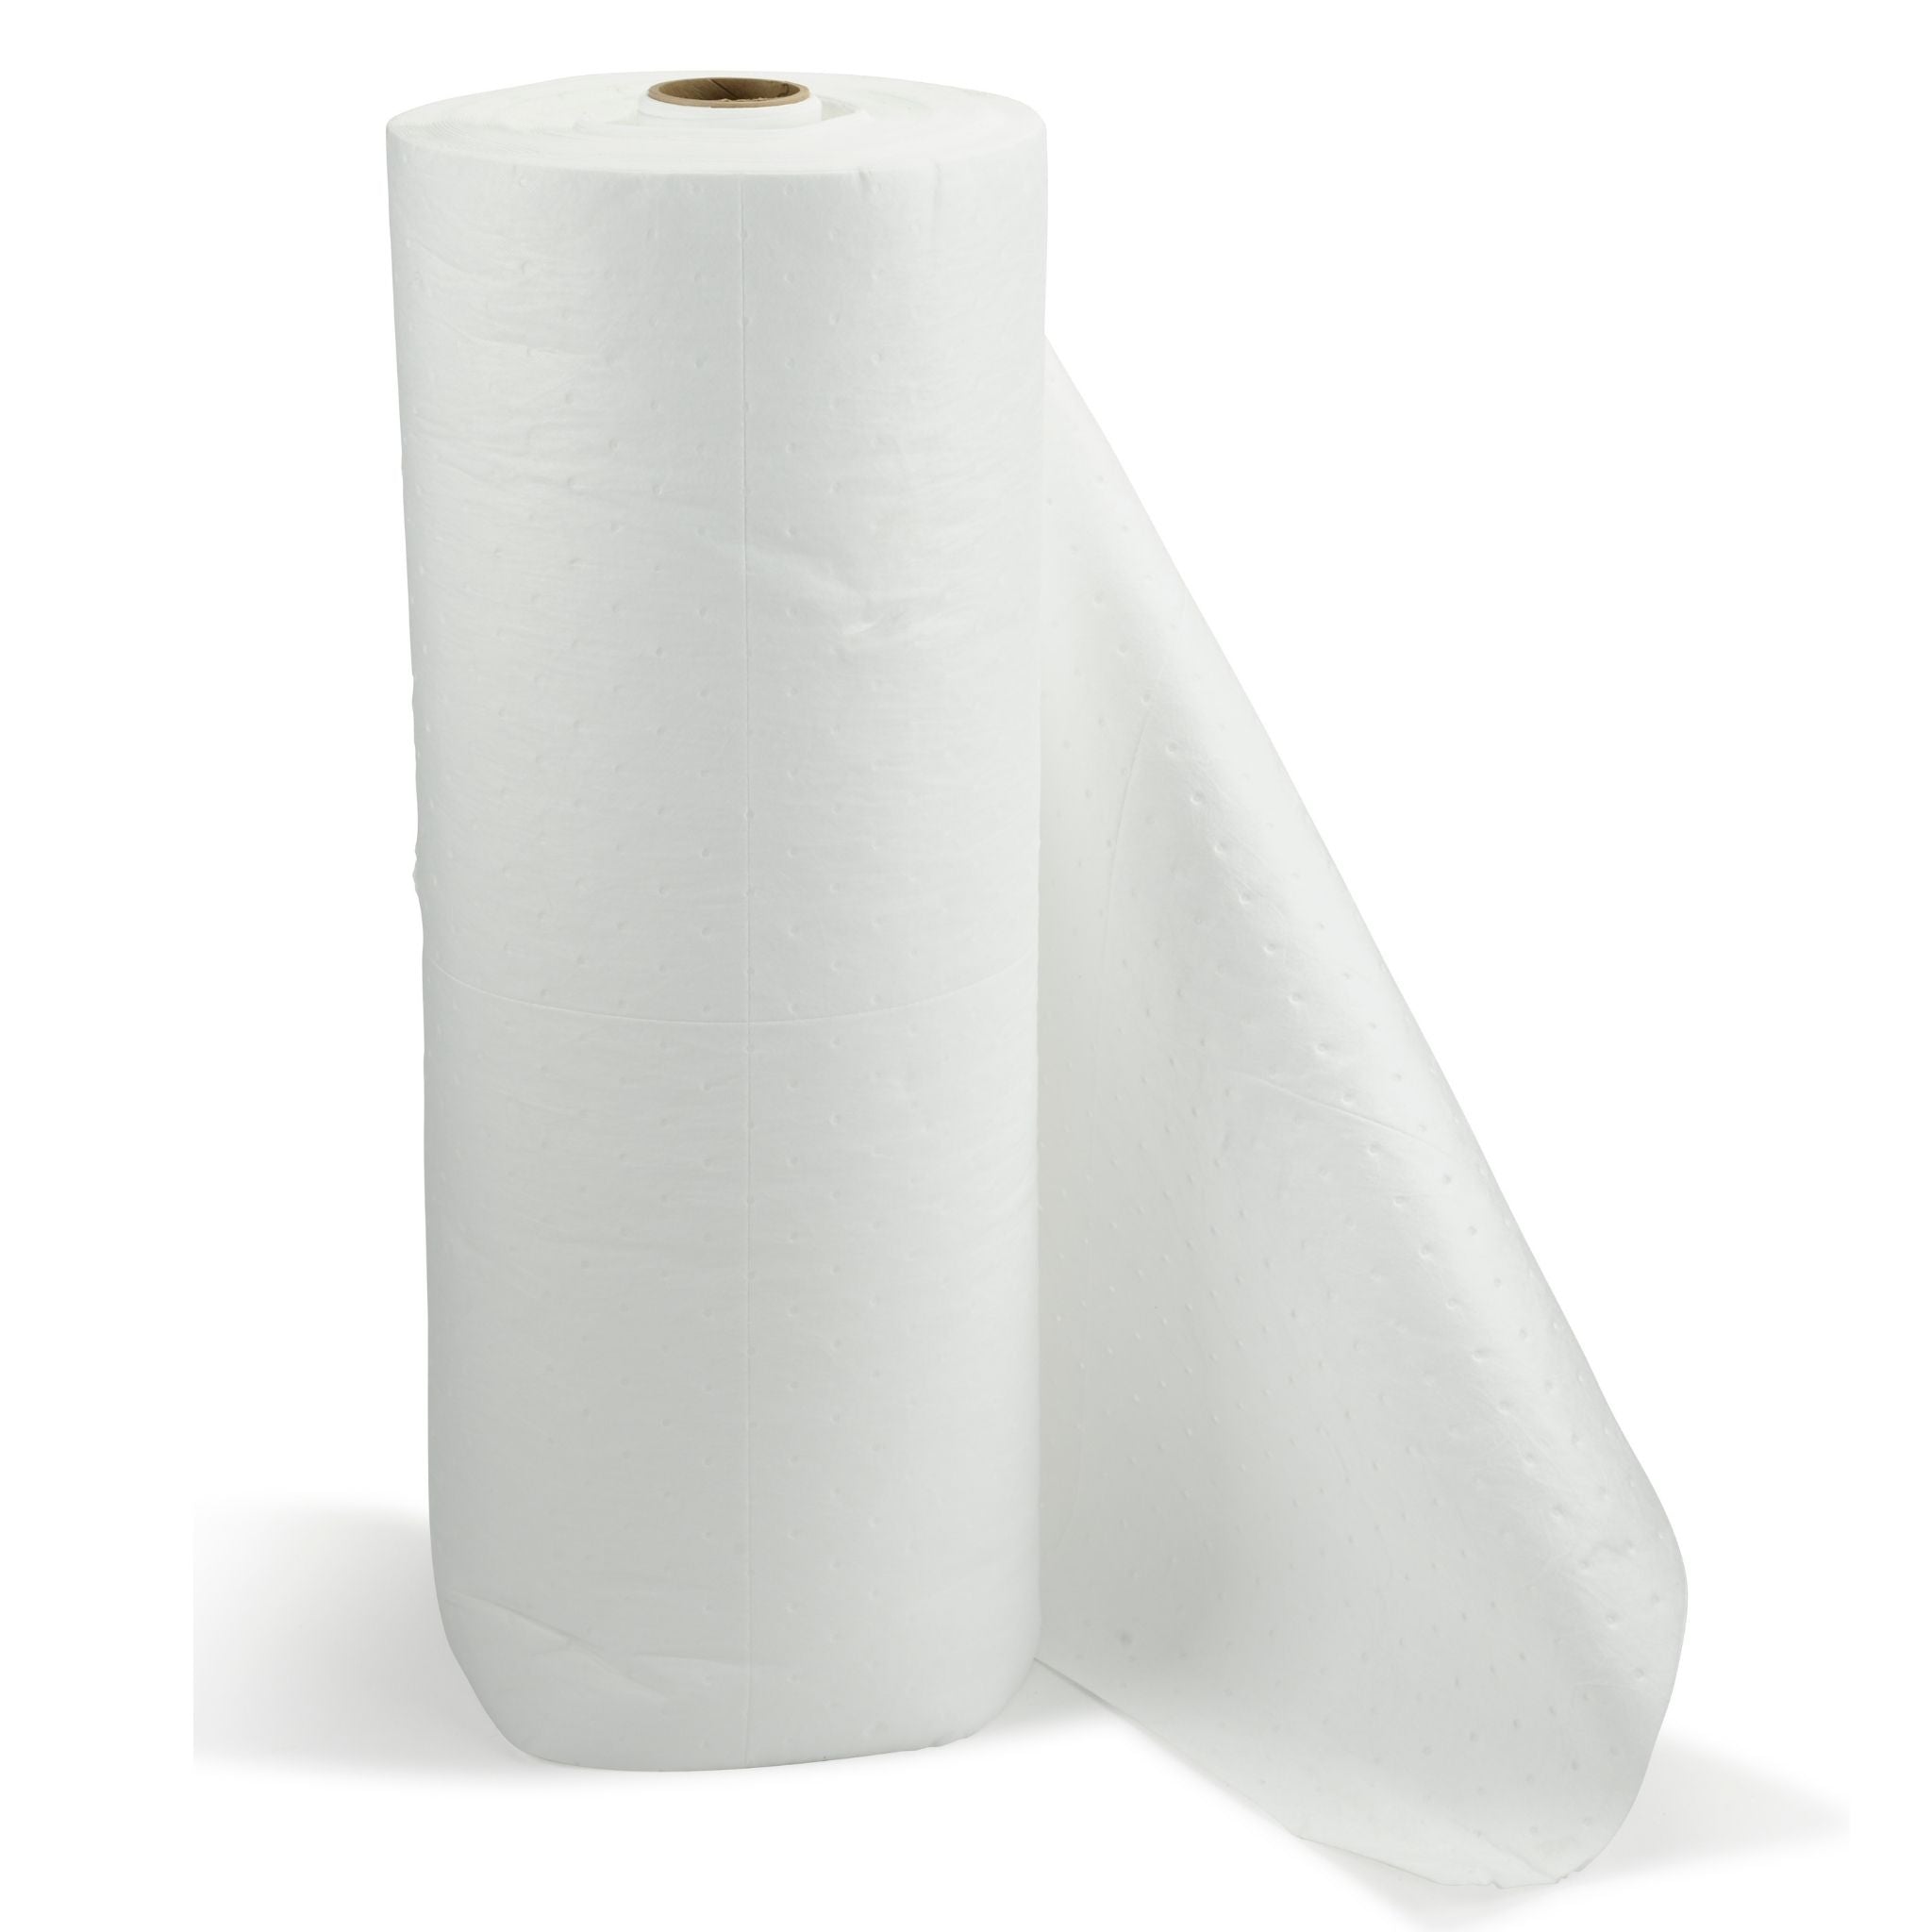 AABACO Oil ONLY White Absorbent Roll - 30" X 150' - Heavy Weight